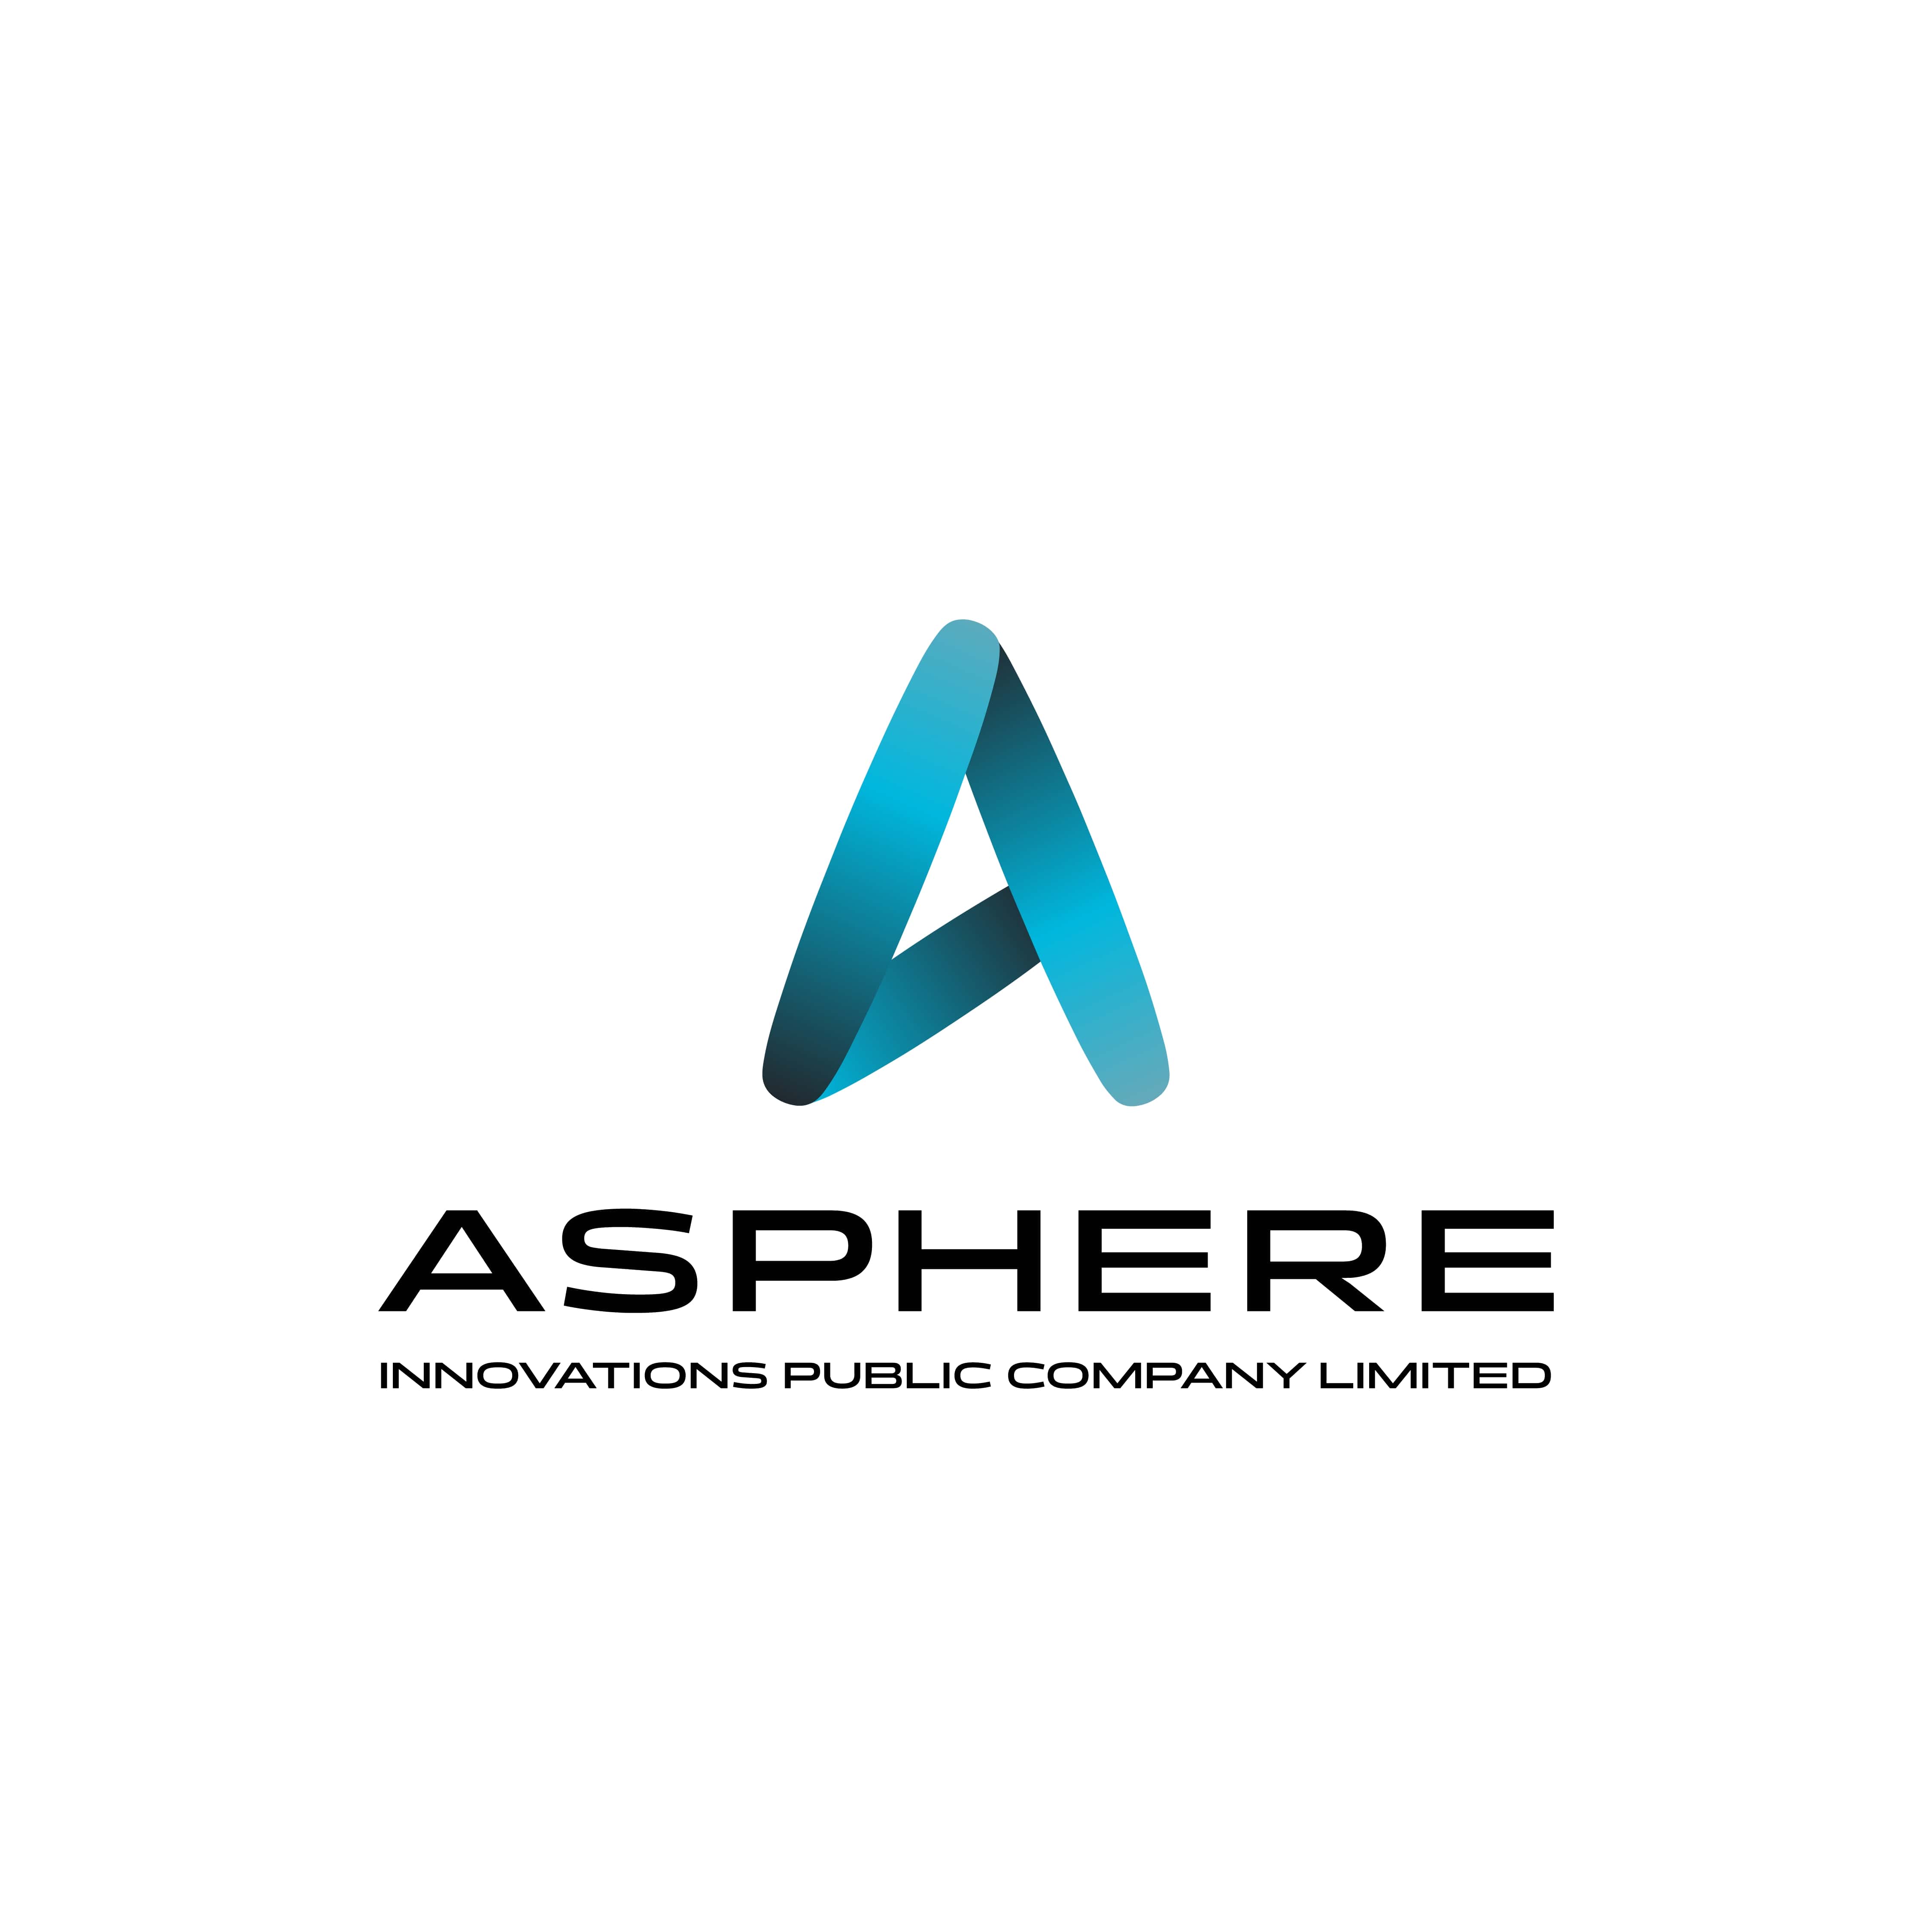 Asphere Innovations Public Company Limited